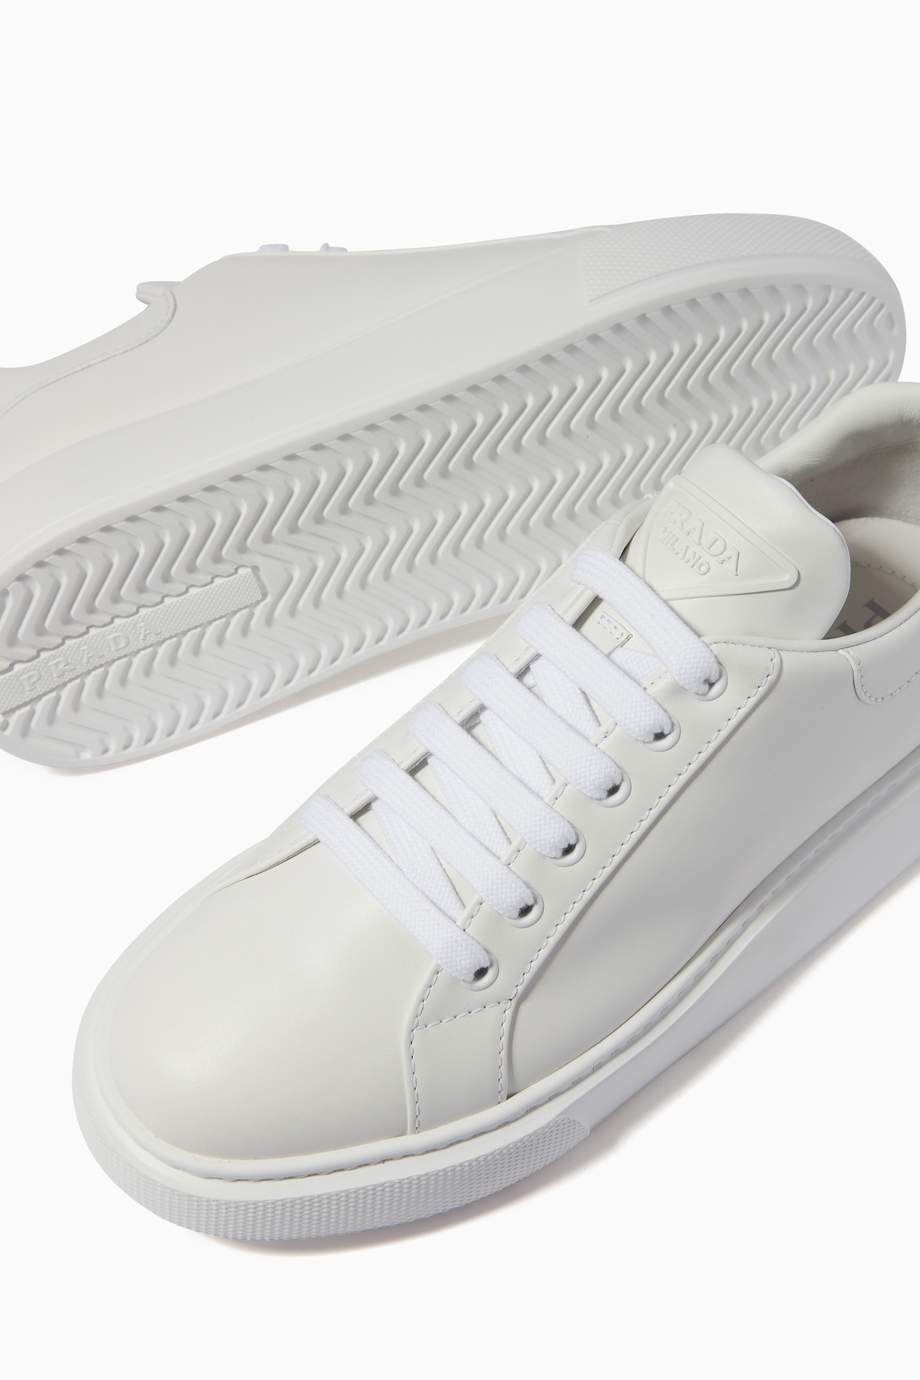 Shop Prada White Triangle Logo Sneakers in Calf Leather for Women ...